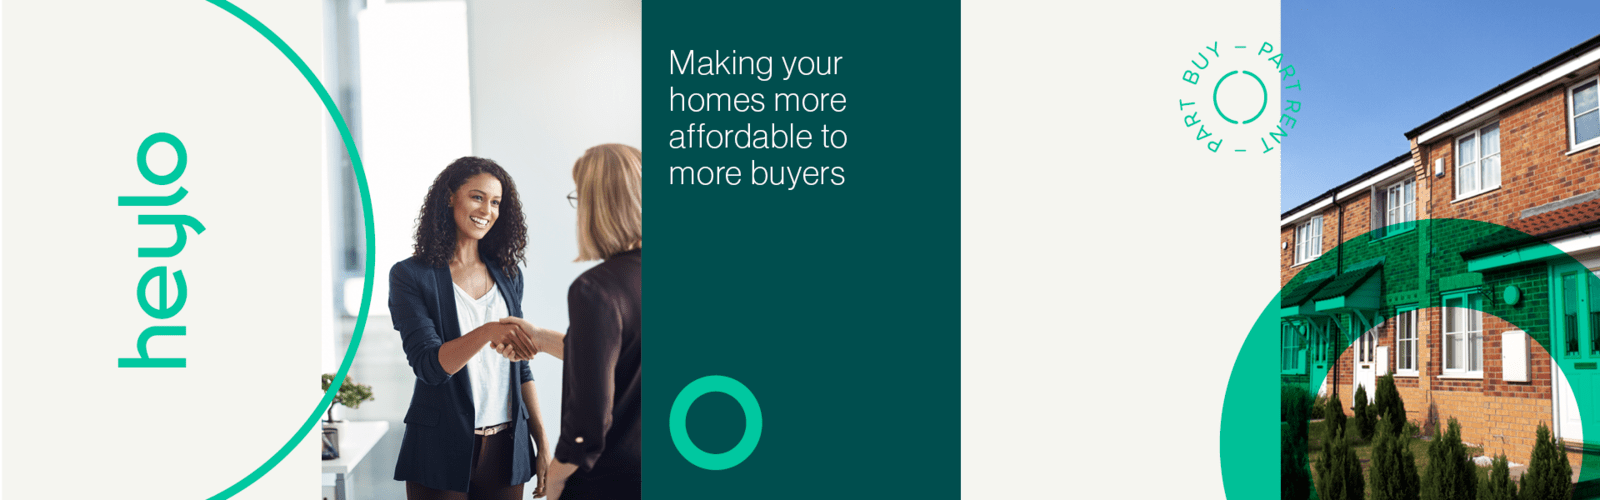 Making homes more affordable to more buyers